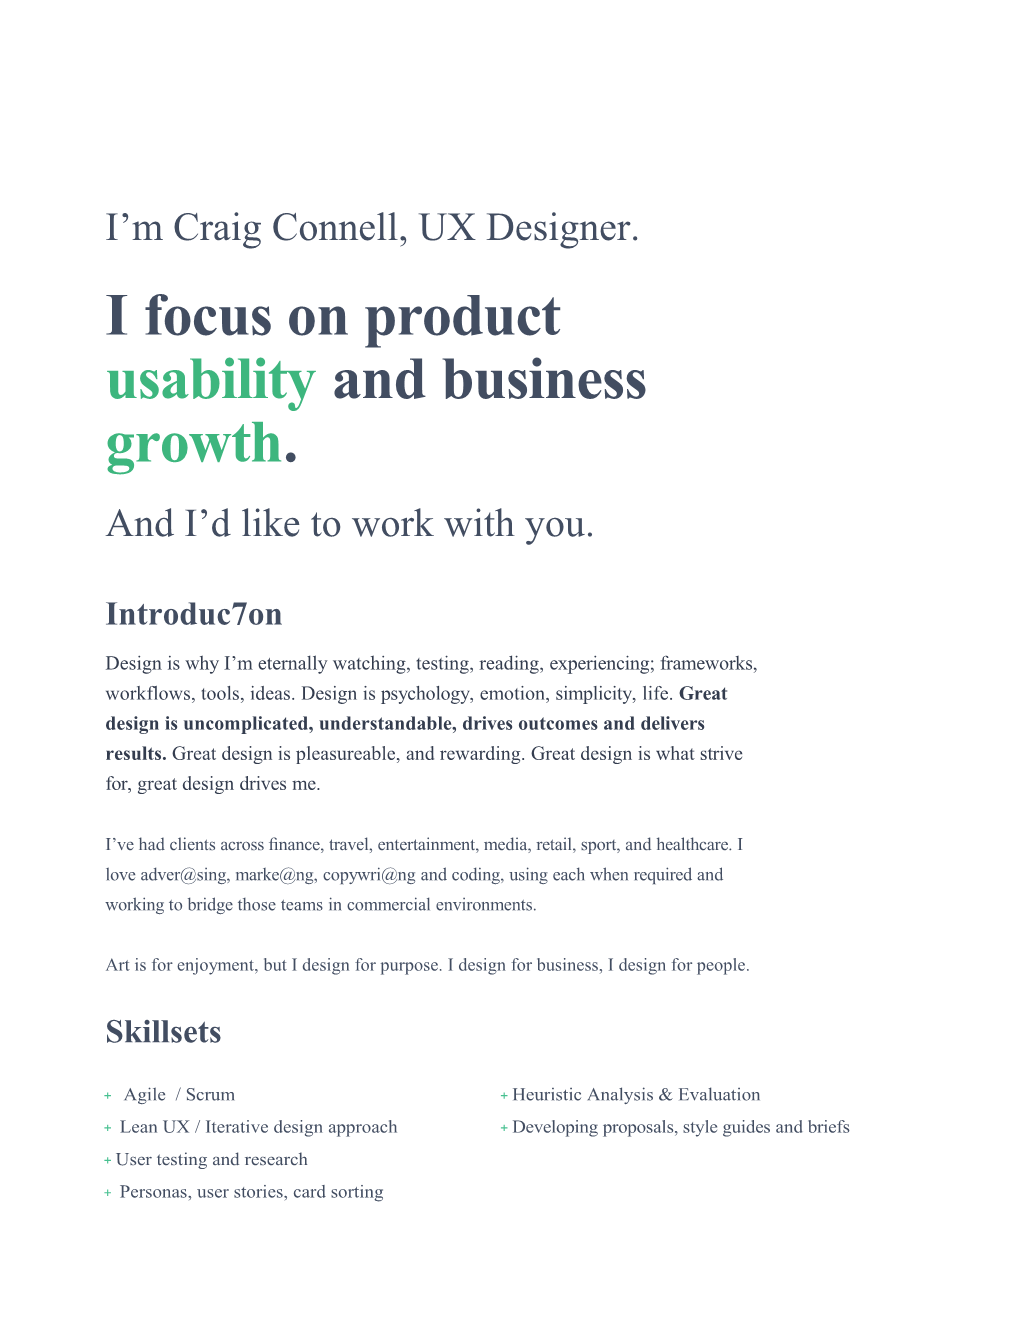 I Focus on Productusabilityand Business Growth